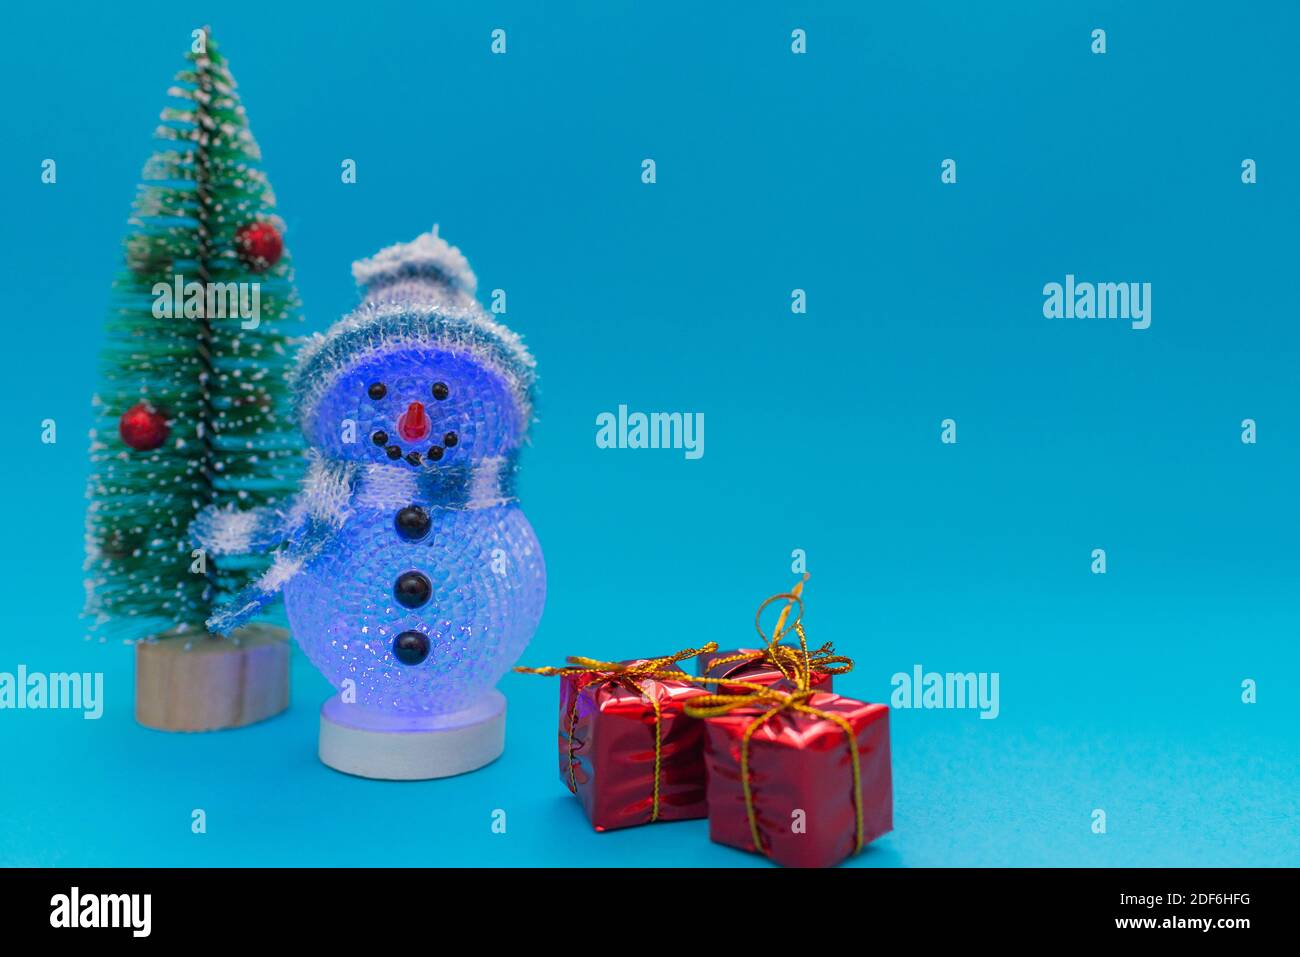 Glows in the dark snowman, presents and Christmas tree with copy space.Christmas and new year celebration. Stock Photo